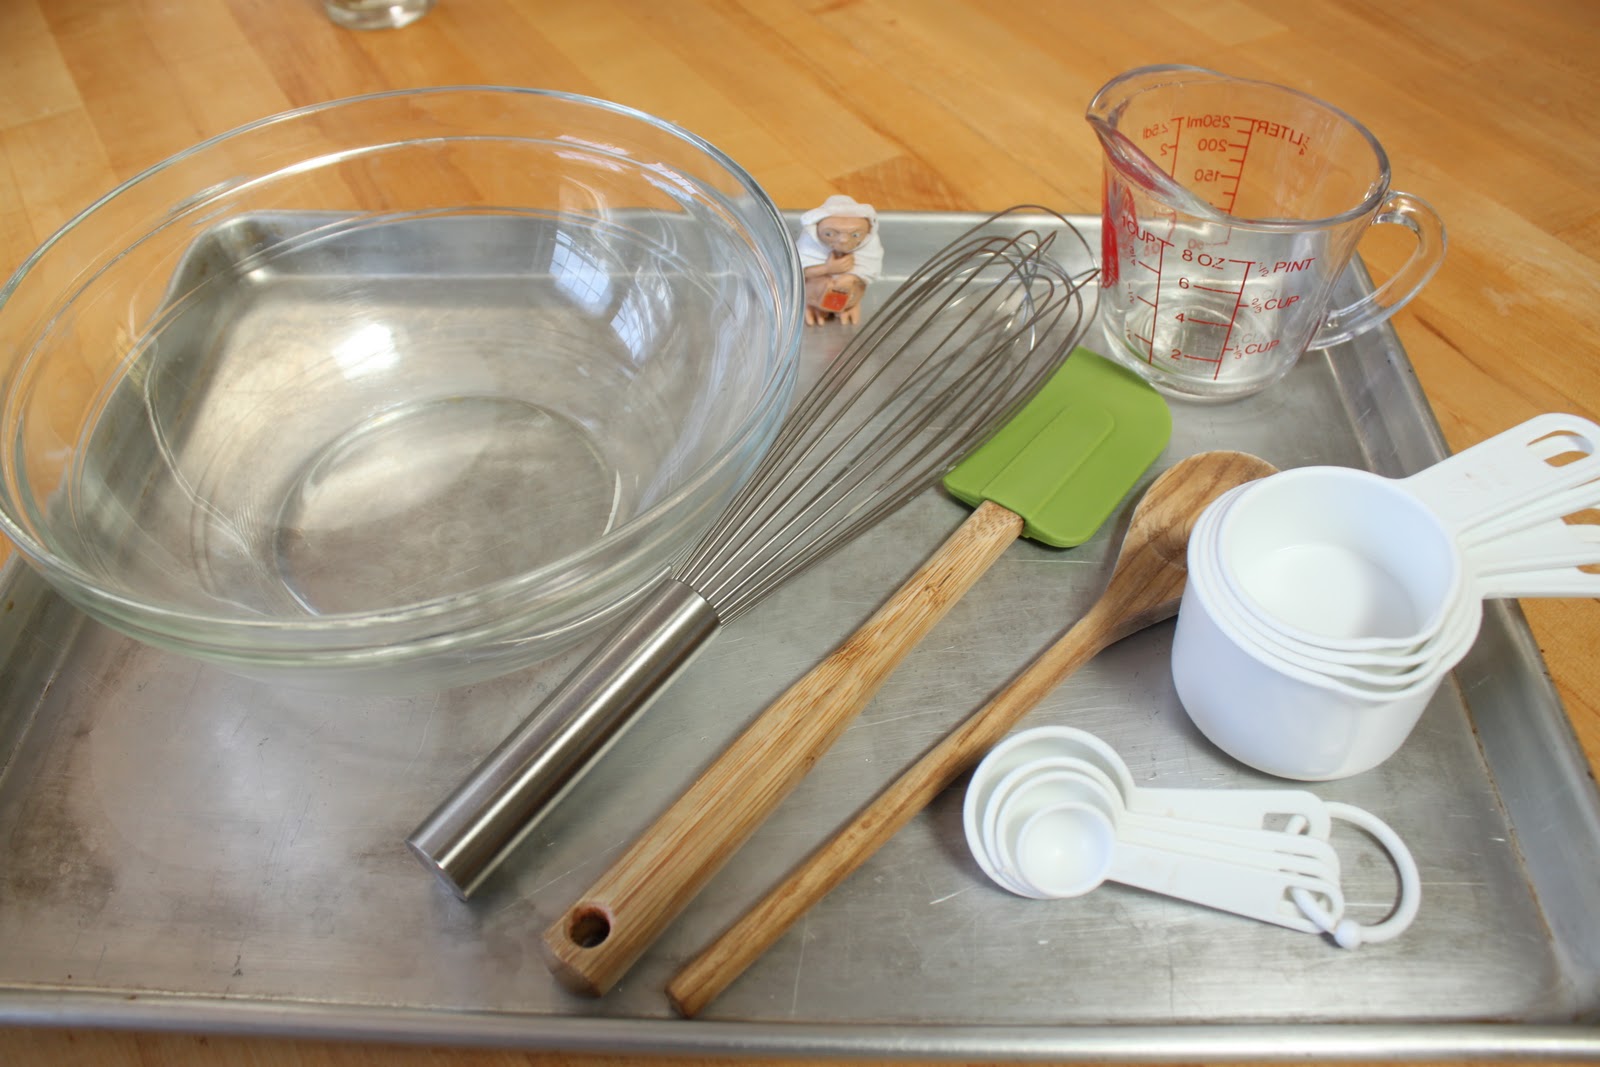 Baking gear from The College Kitchen